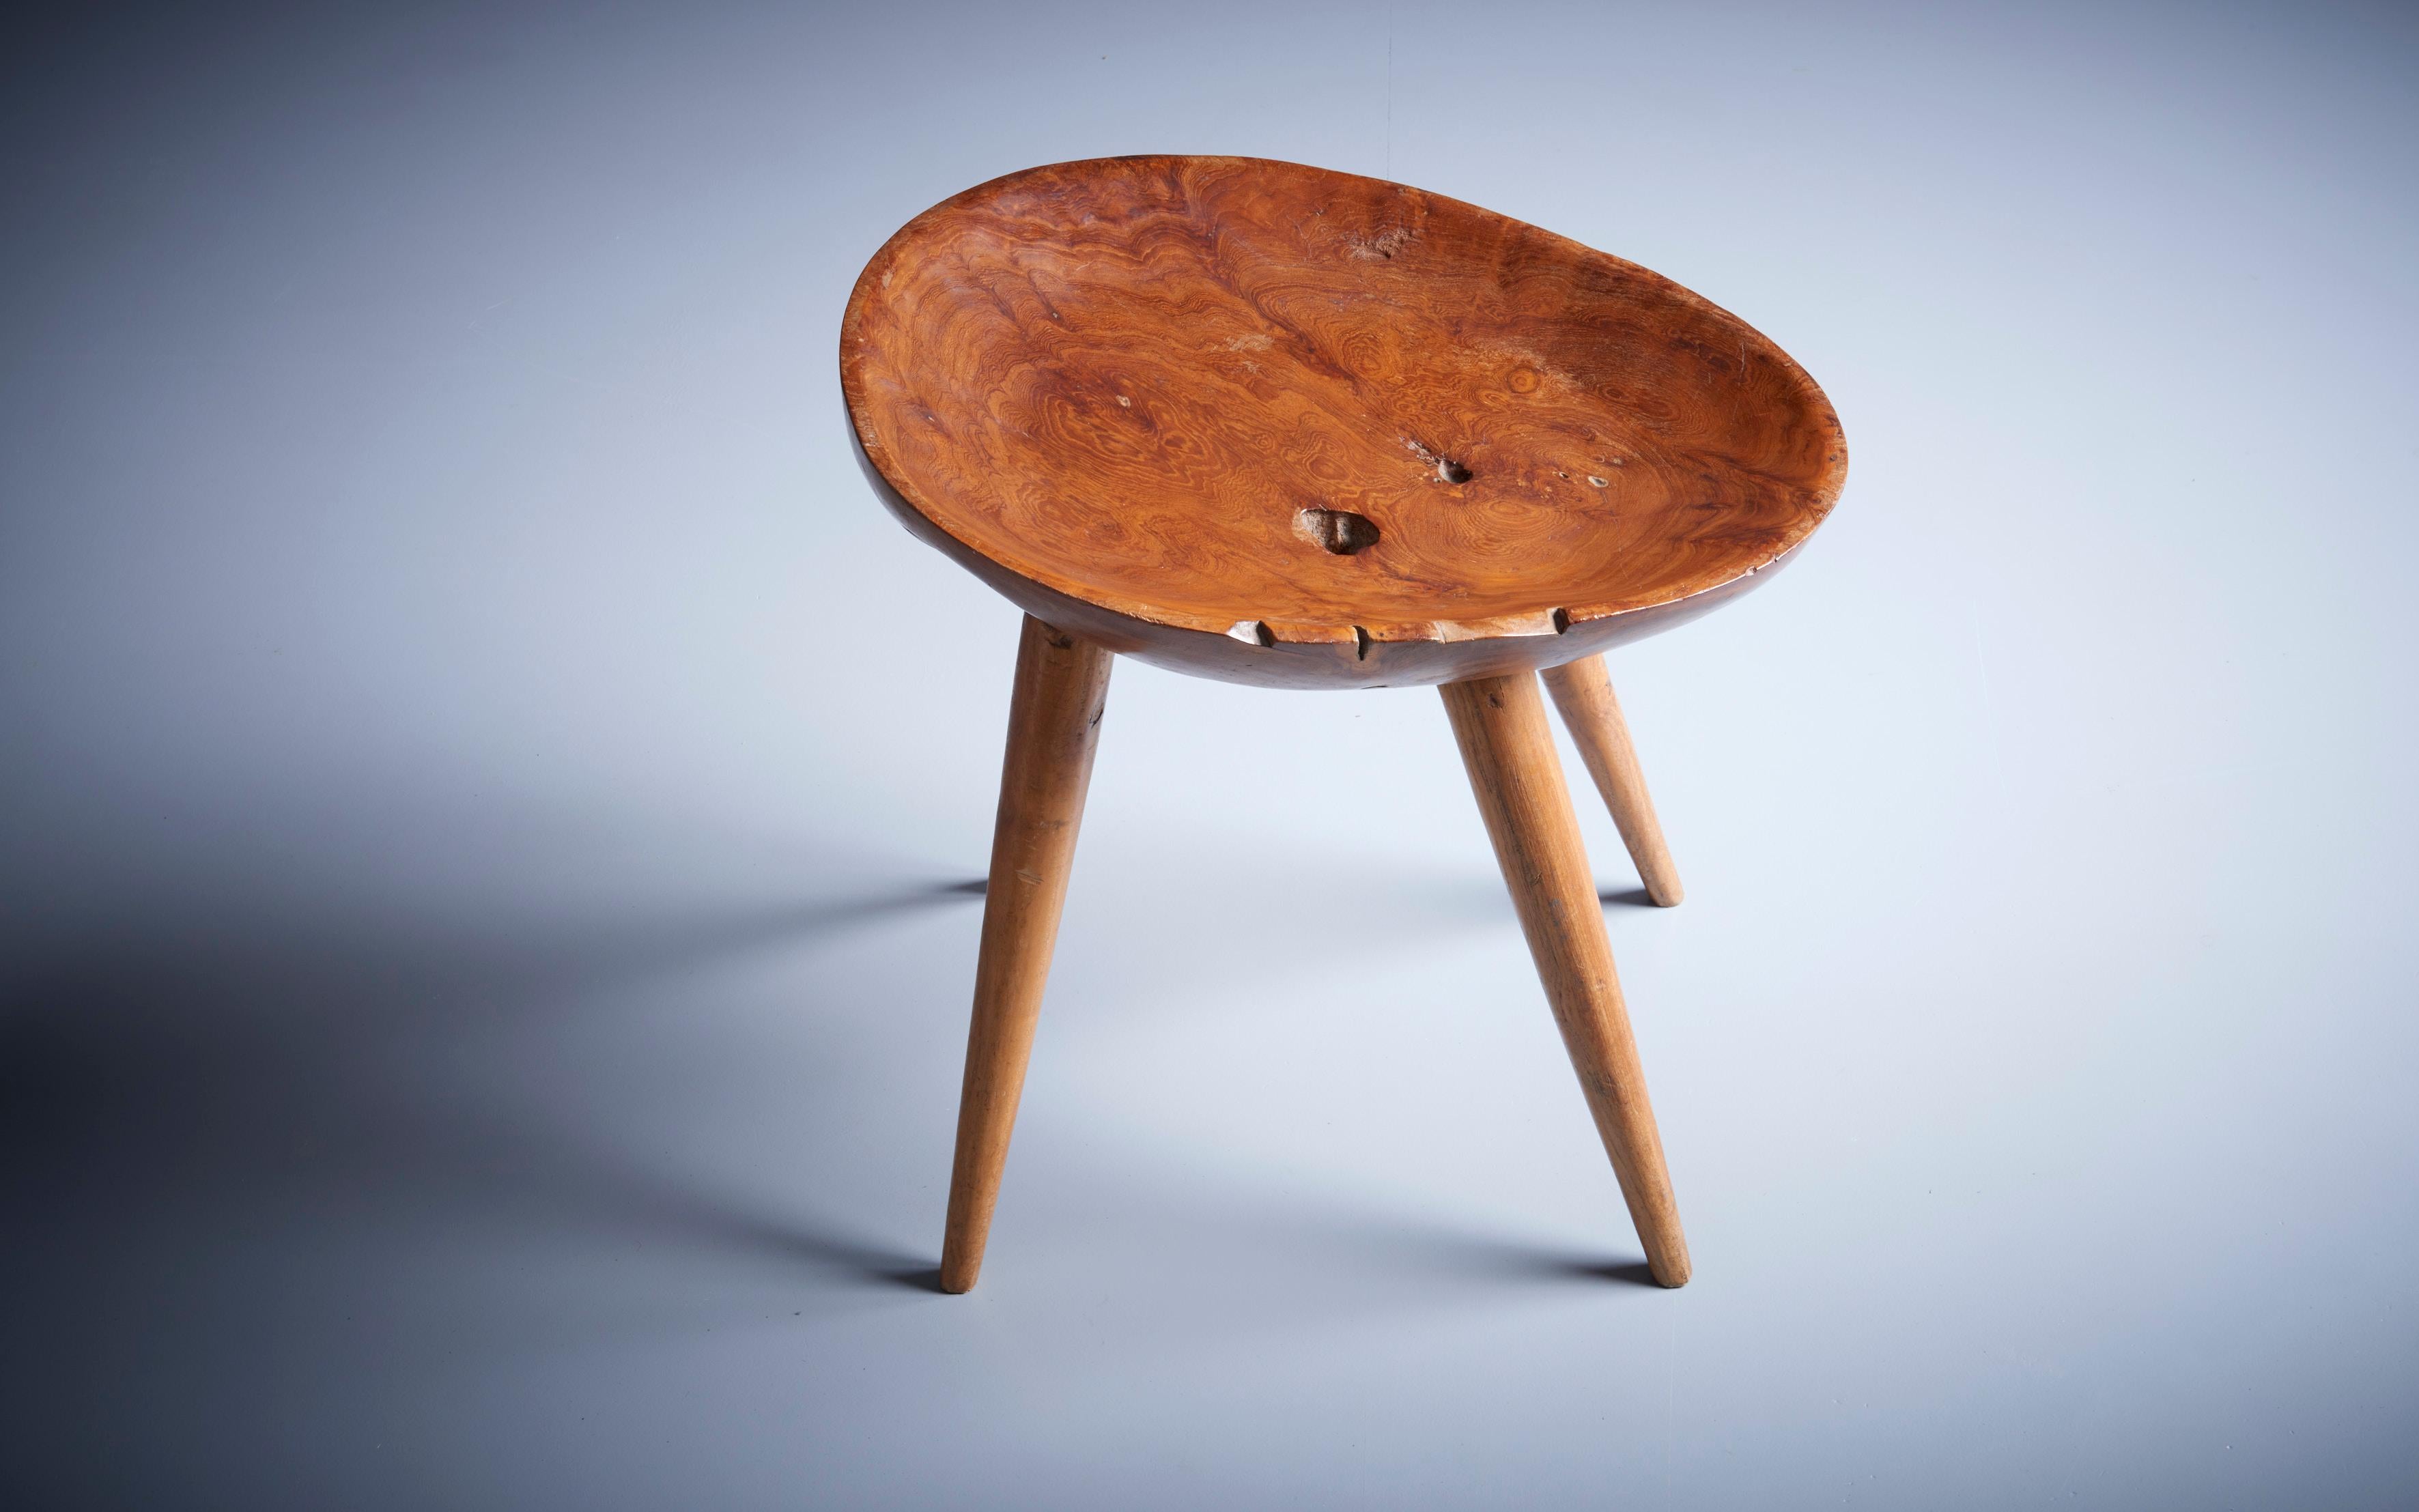 Sculptural French Studio Wood Stool with Carved Seat, France, 1960s For Sale 1